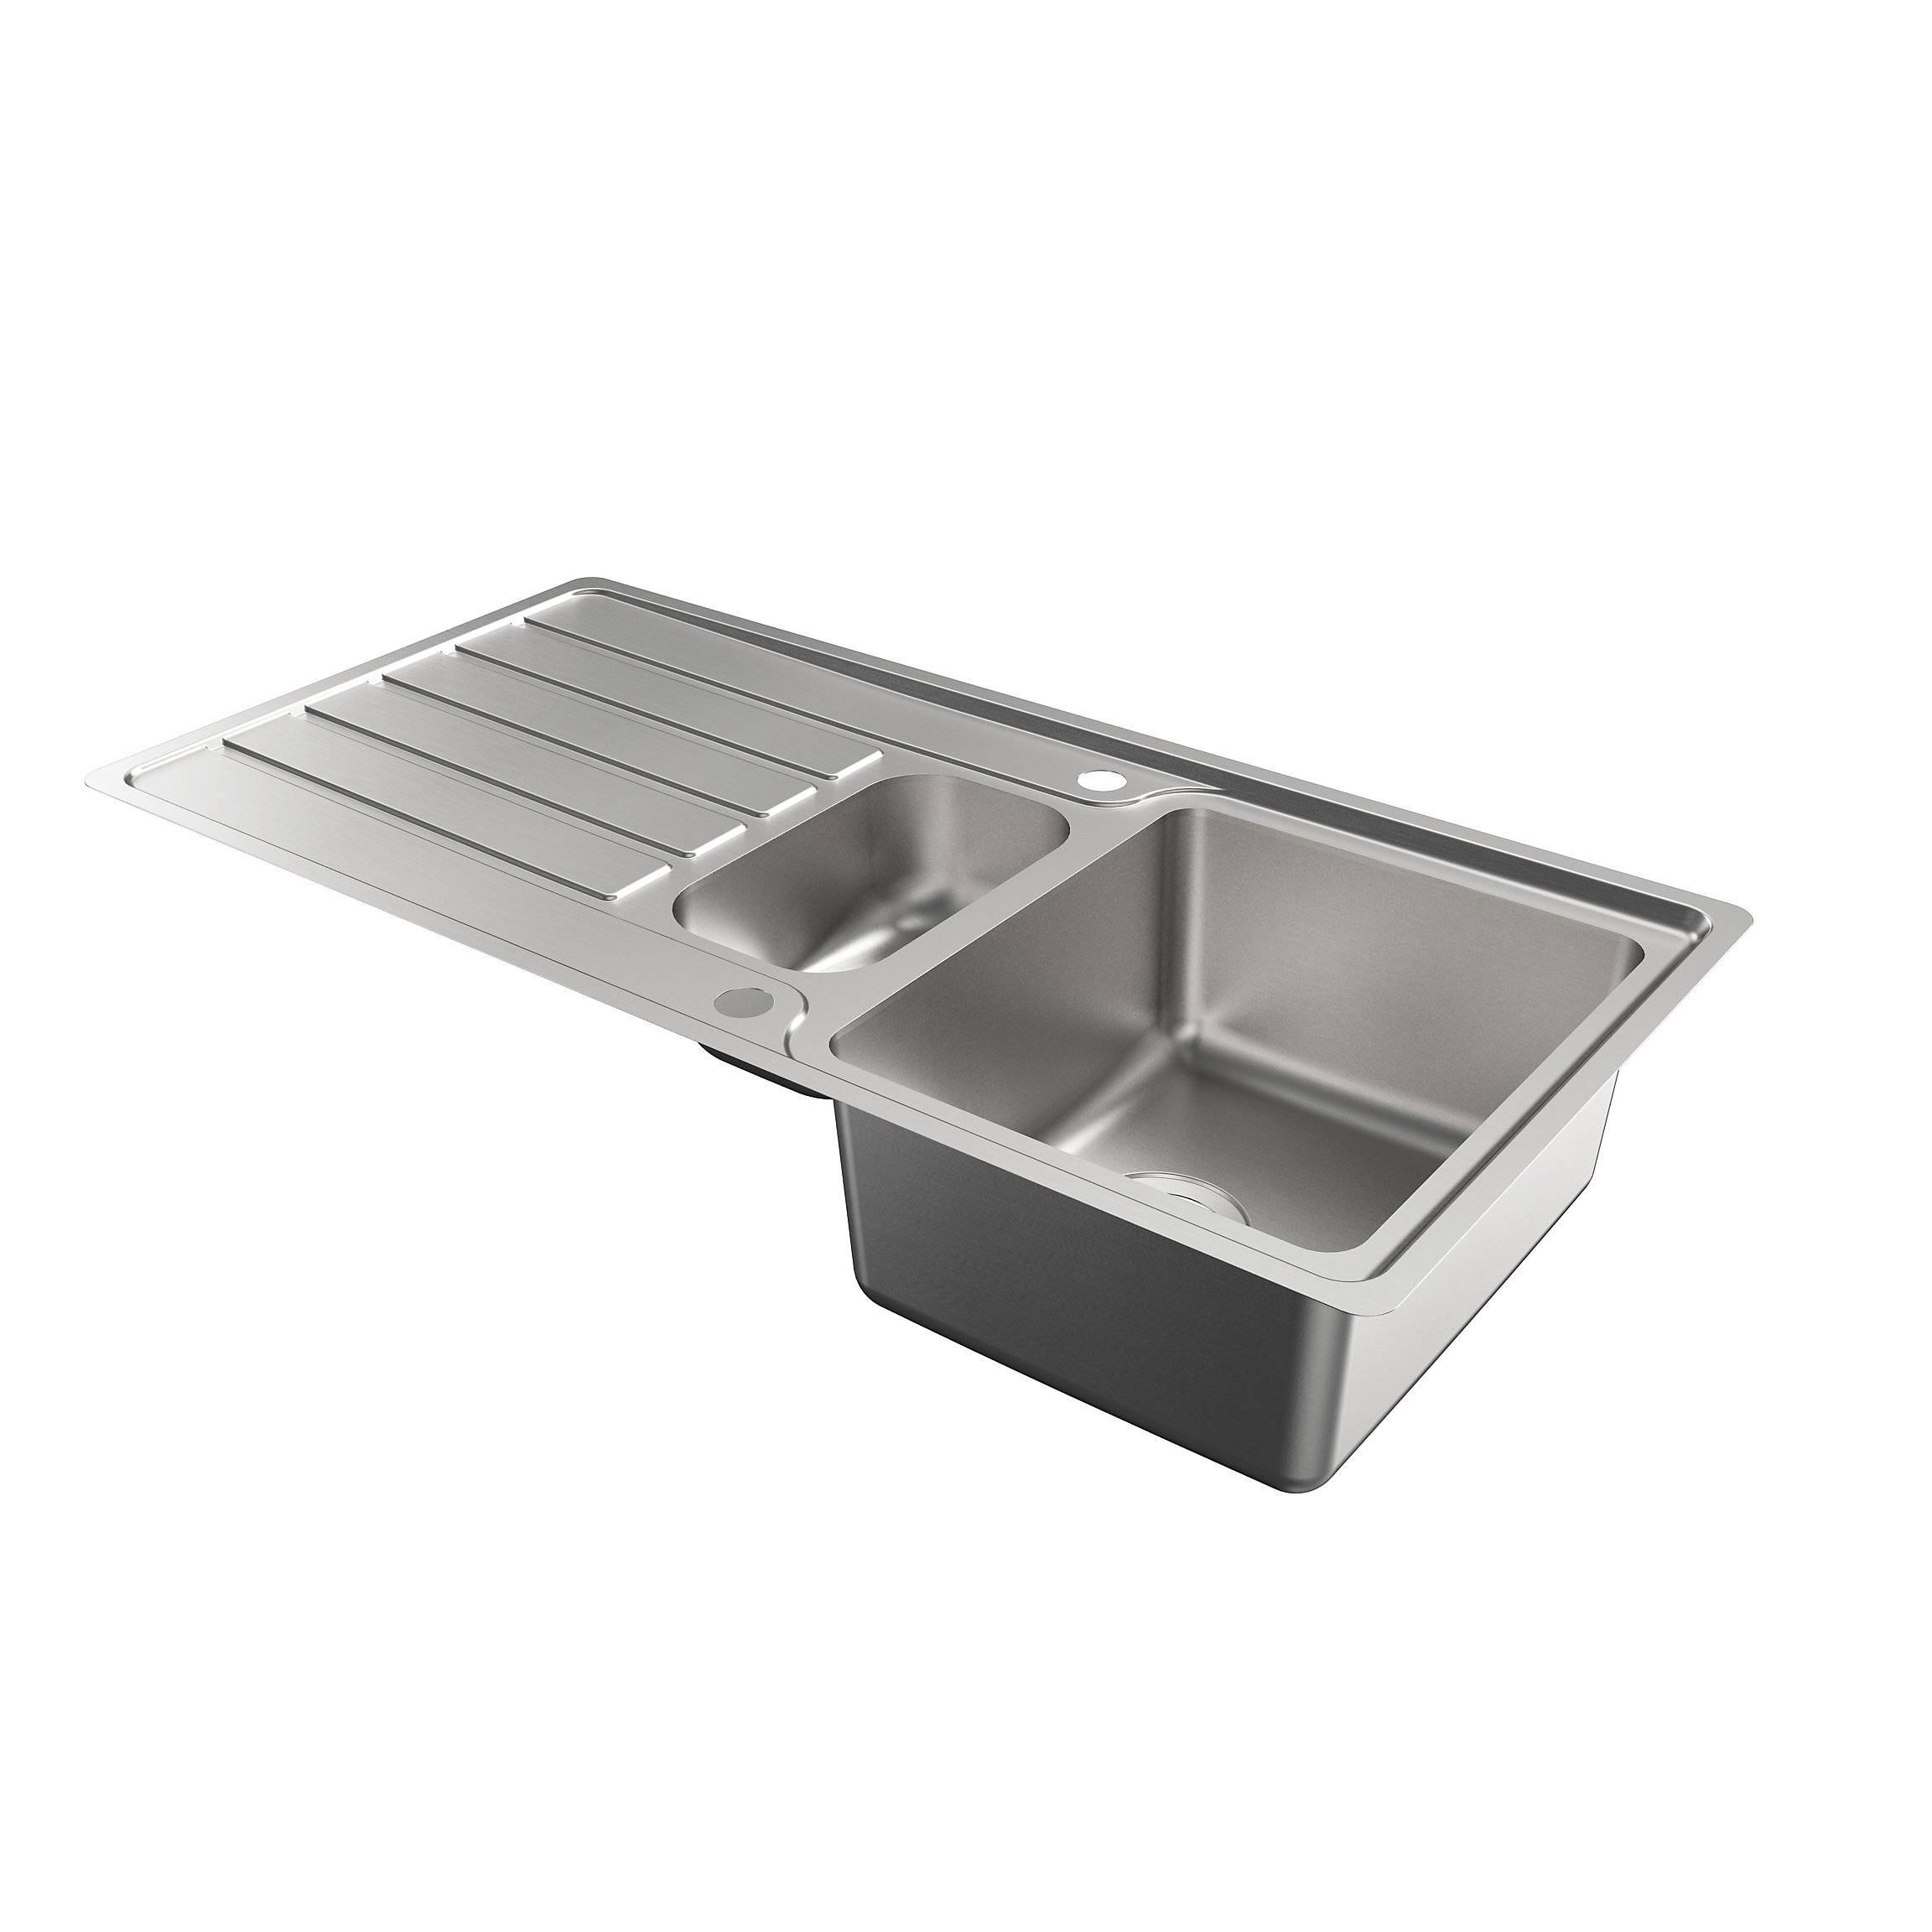 Cooke & Lewis Apollonia Brushed Stainless steel 1.5 Bowl Sink & drainer Reversible drainer 6391